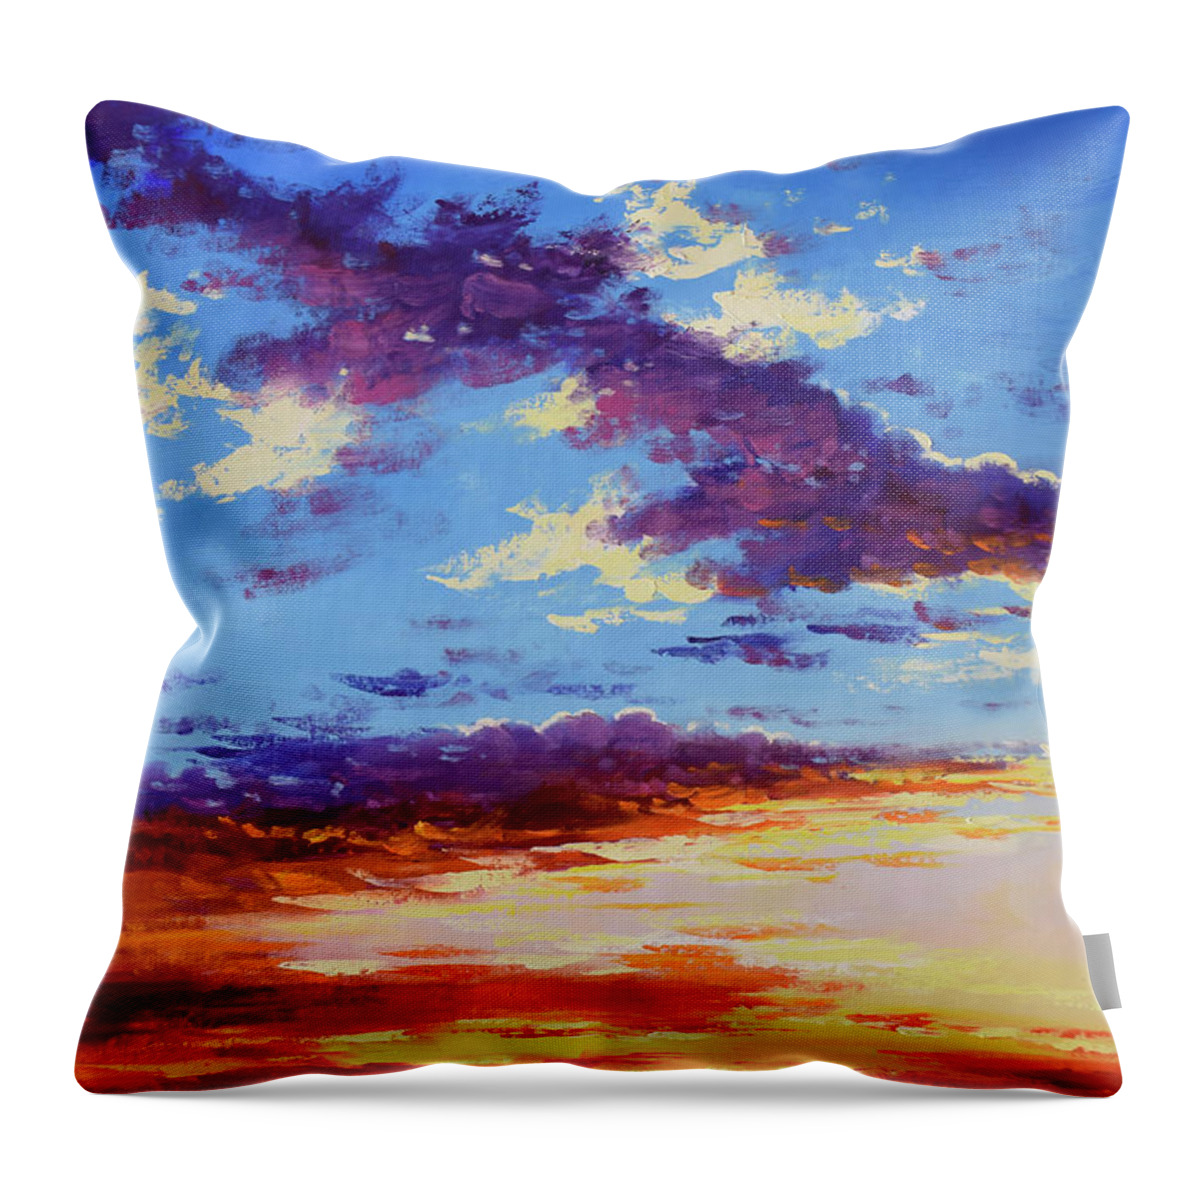 Landscape Paintings Throw Pillow featuring the painting Rural Sunset by Graham Gercken